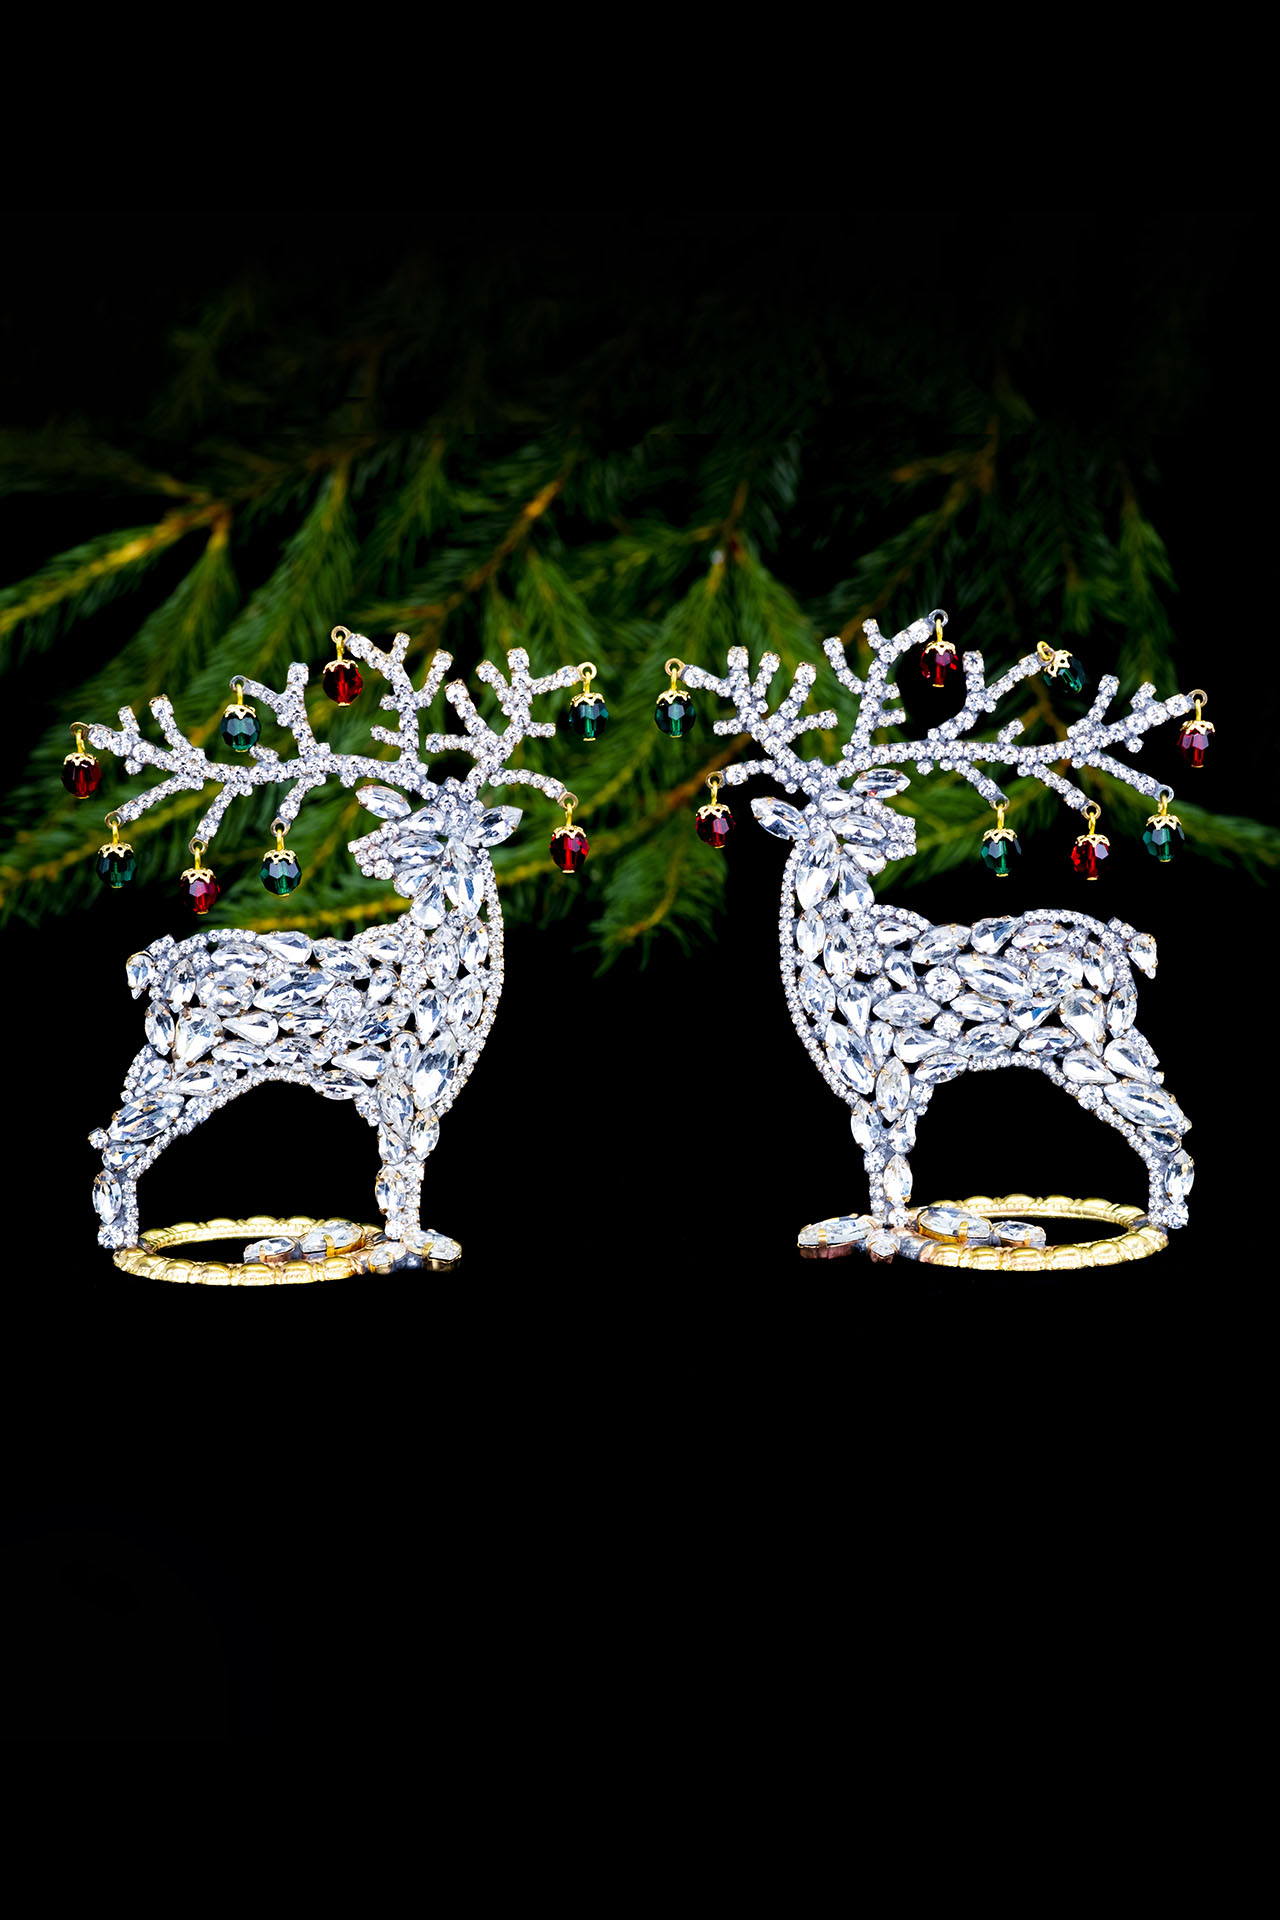 Decorating for Christmas - Reindeers with coloured rhinestones